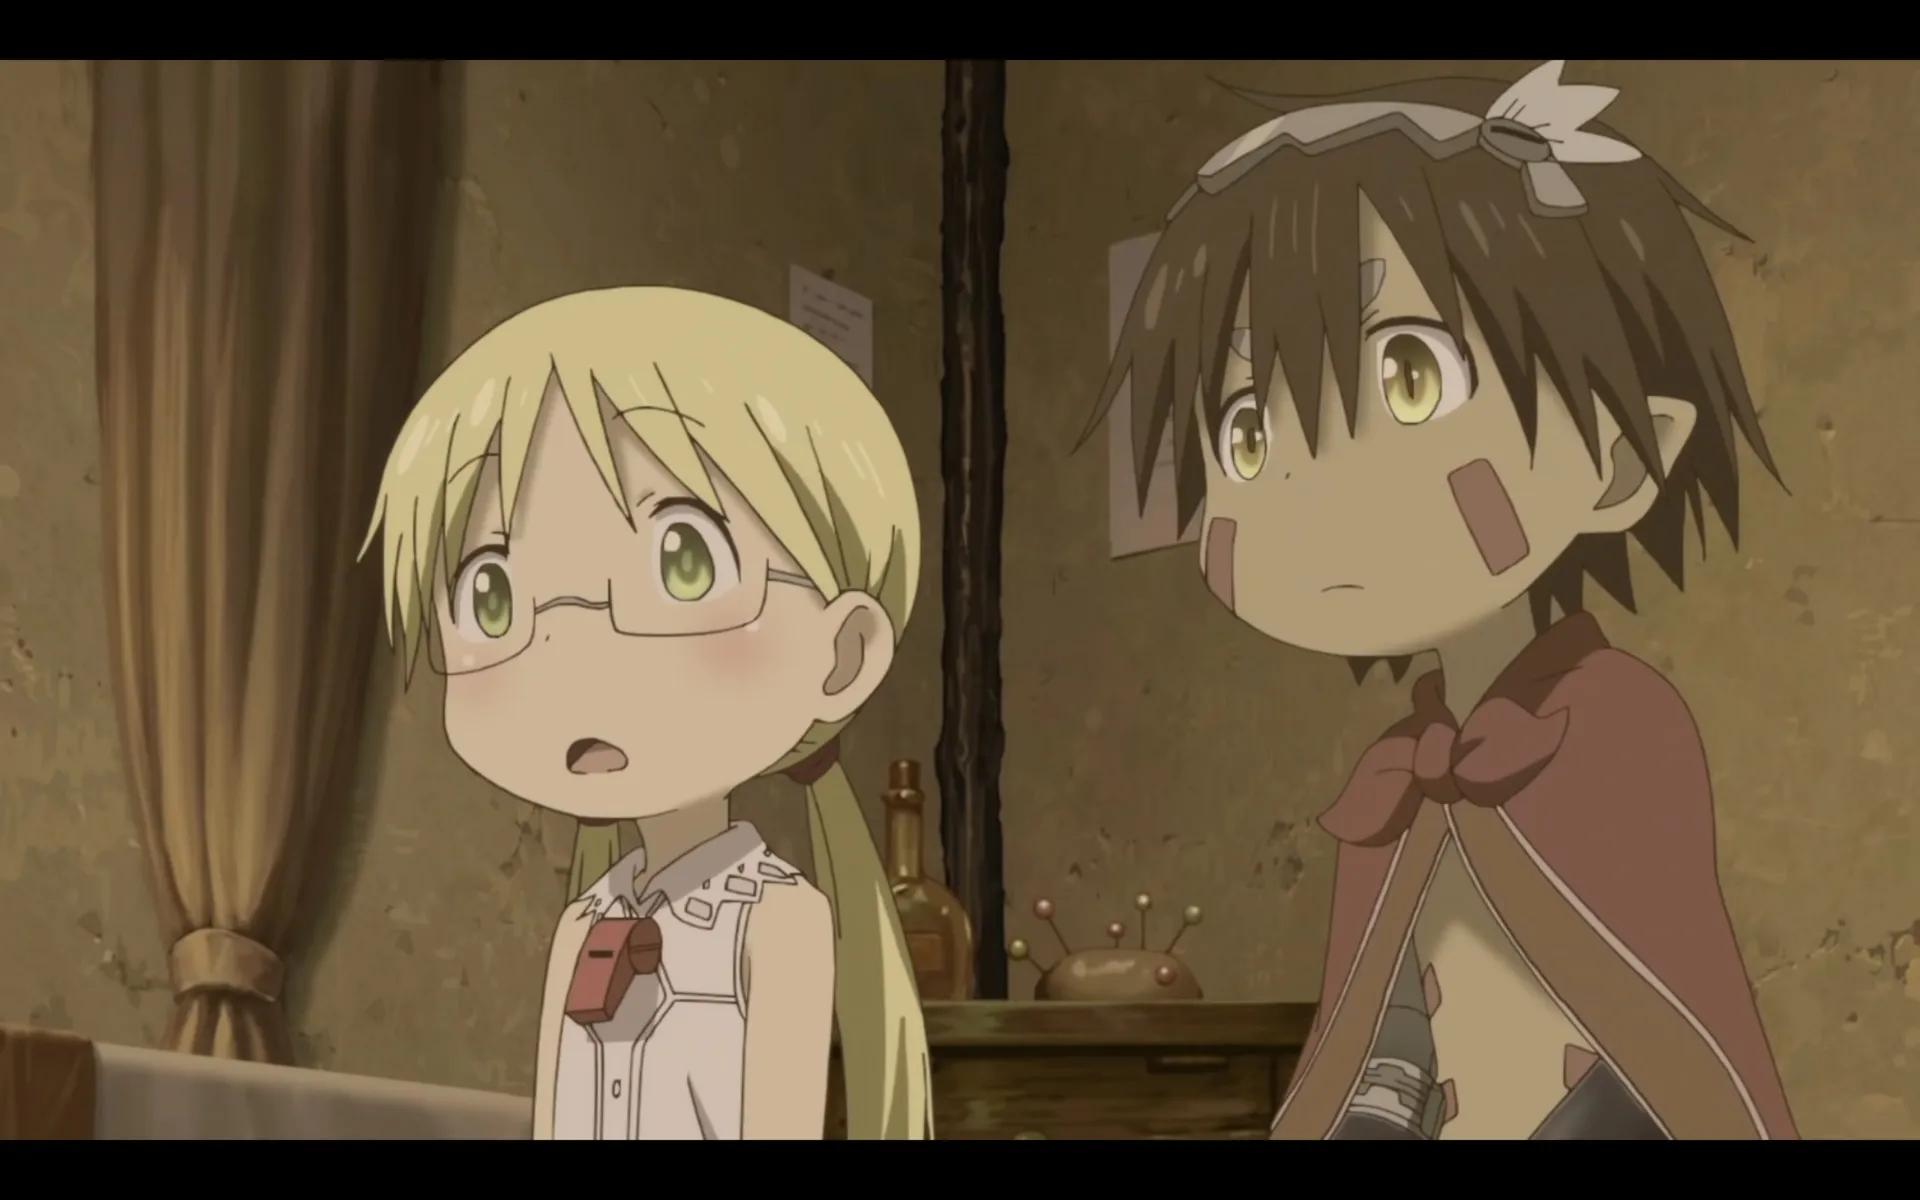 Made In Abyss RPG Gets New Trailer Showing New Systems And Ending